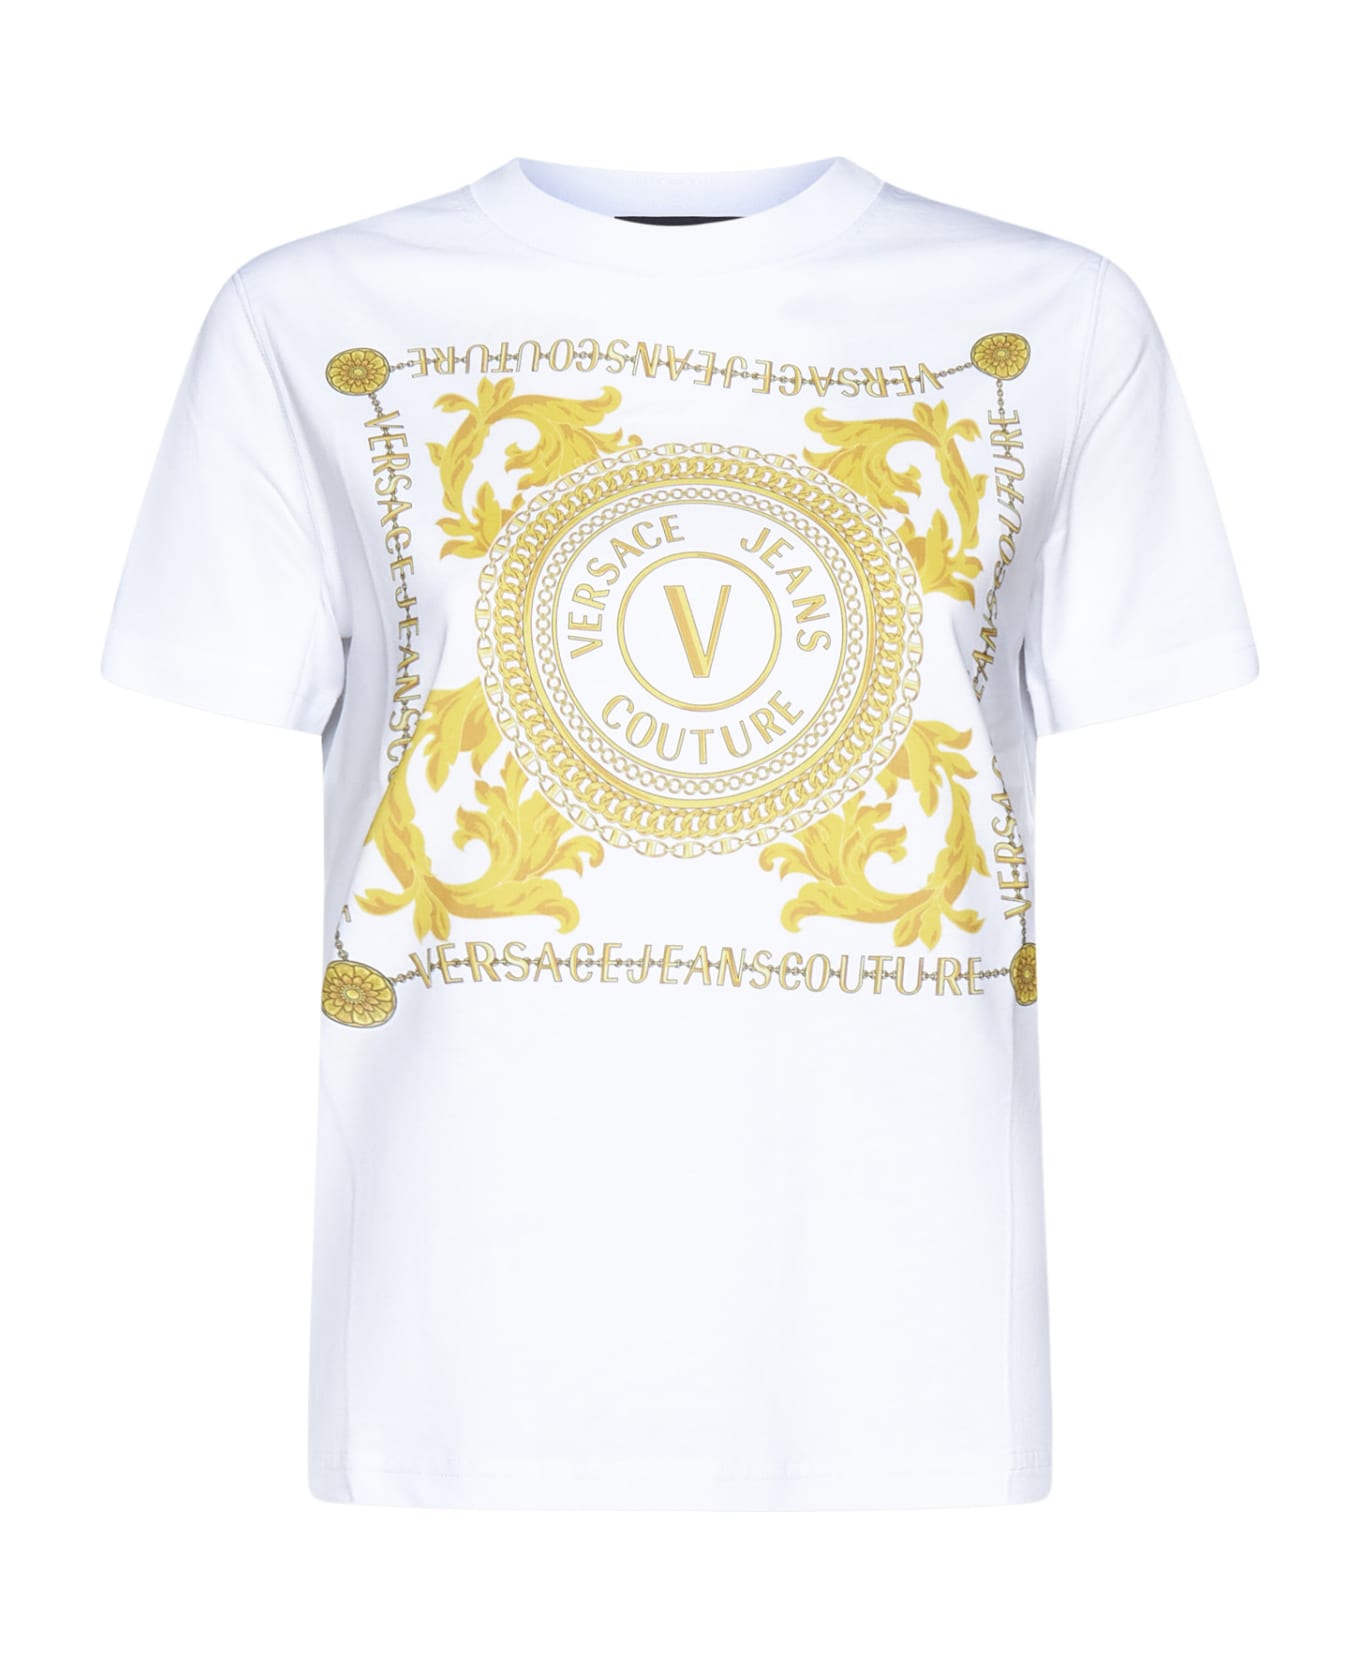 Versace Jeans Couture T-shirt - White/gold